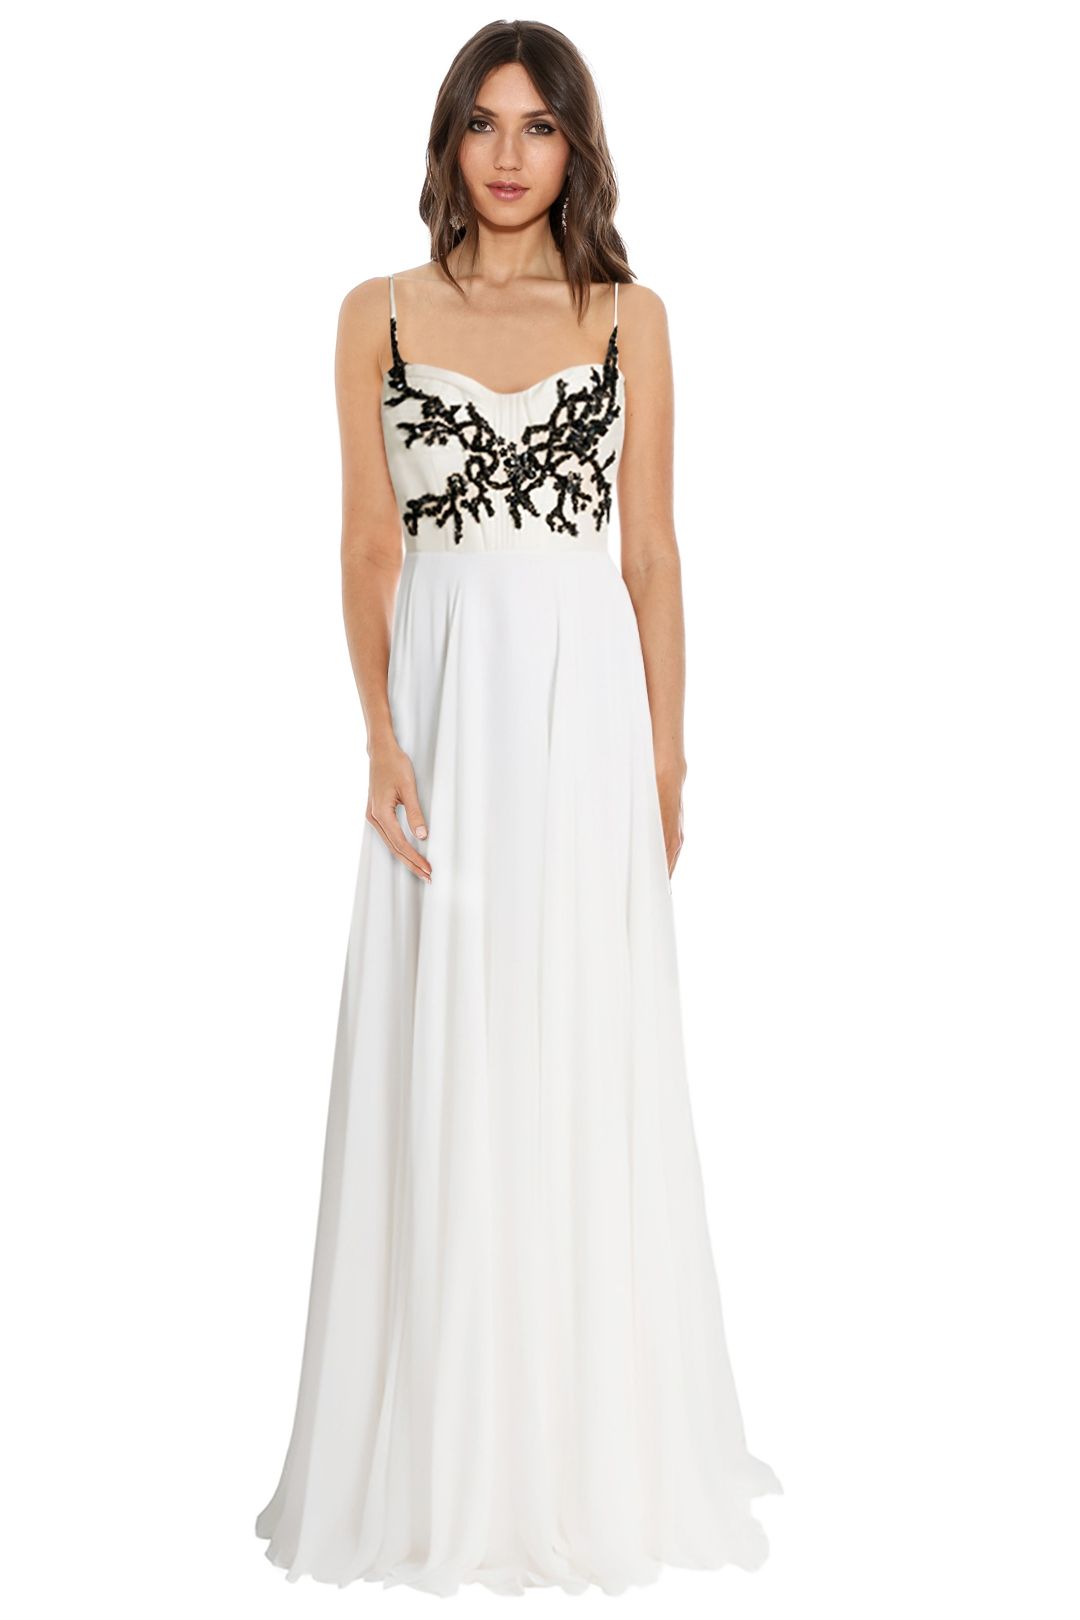 Alex Perry - Minerva Gown - White - Front